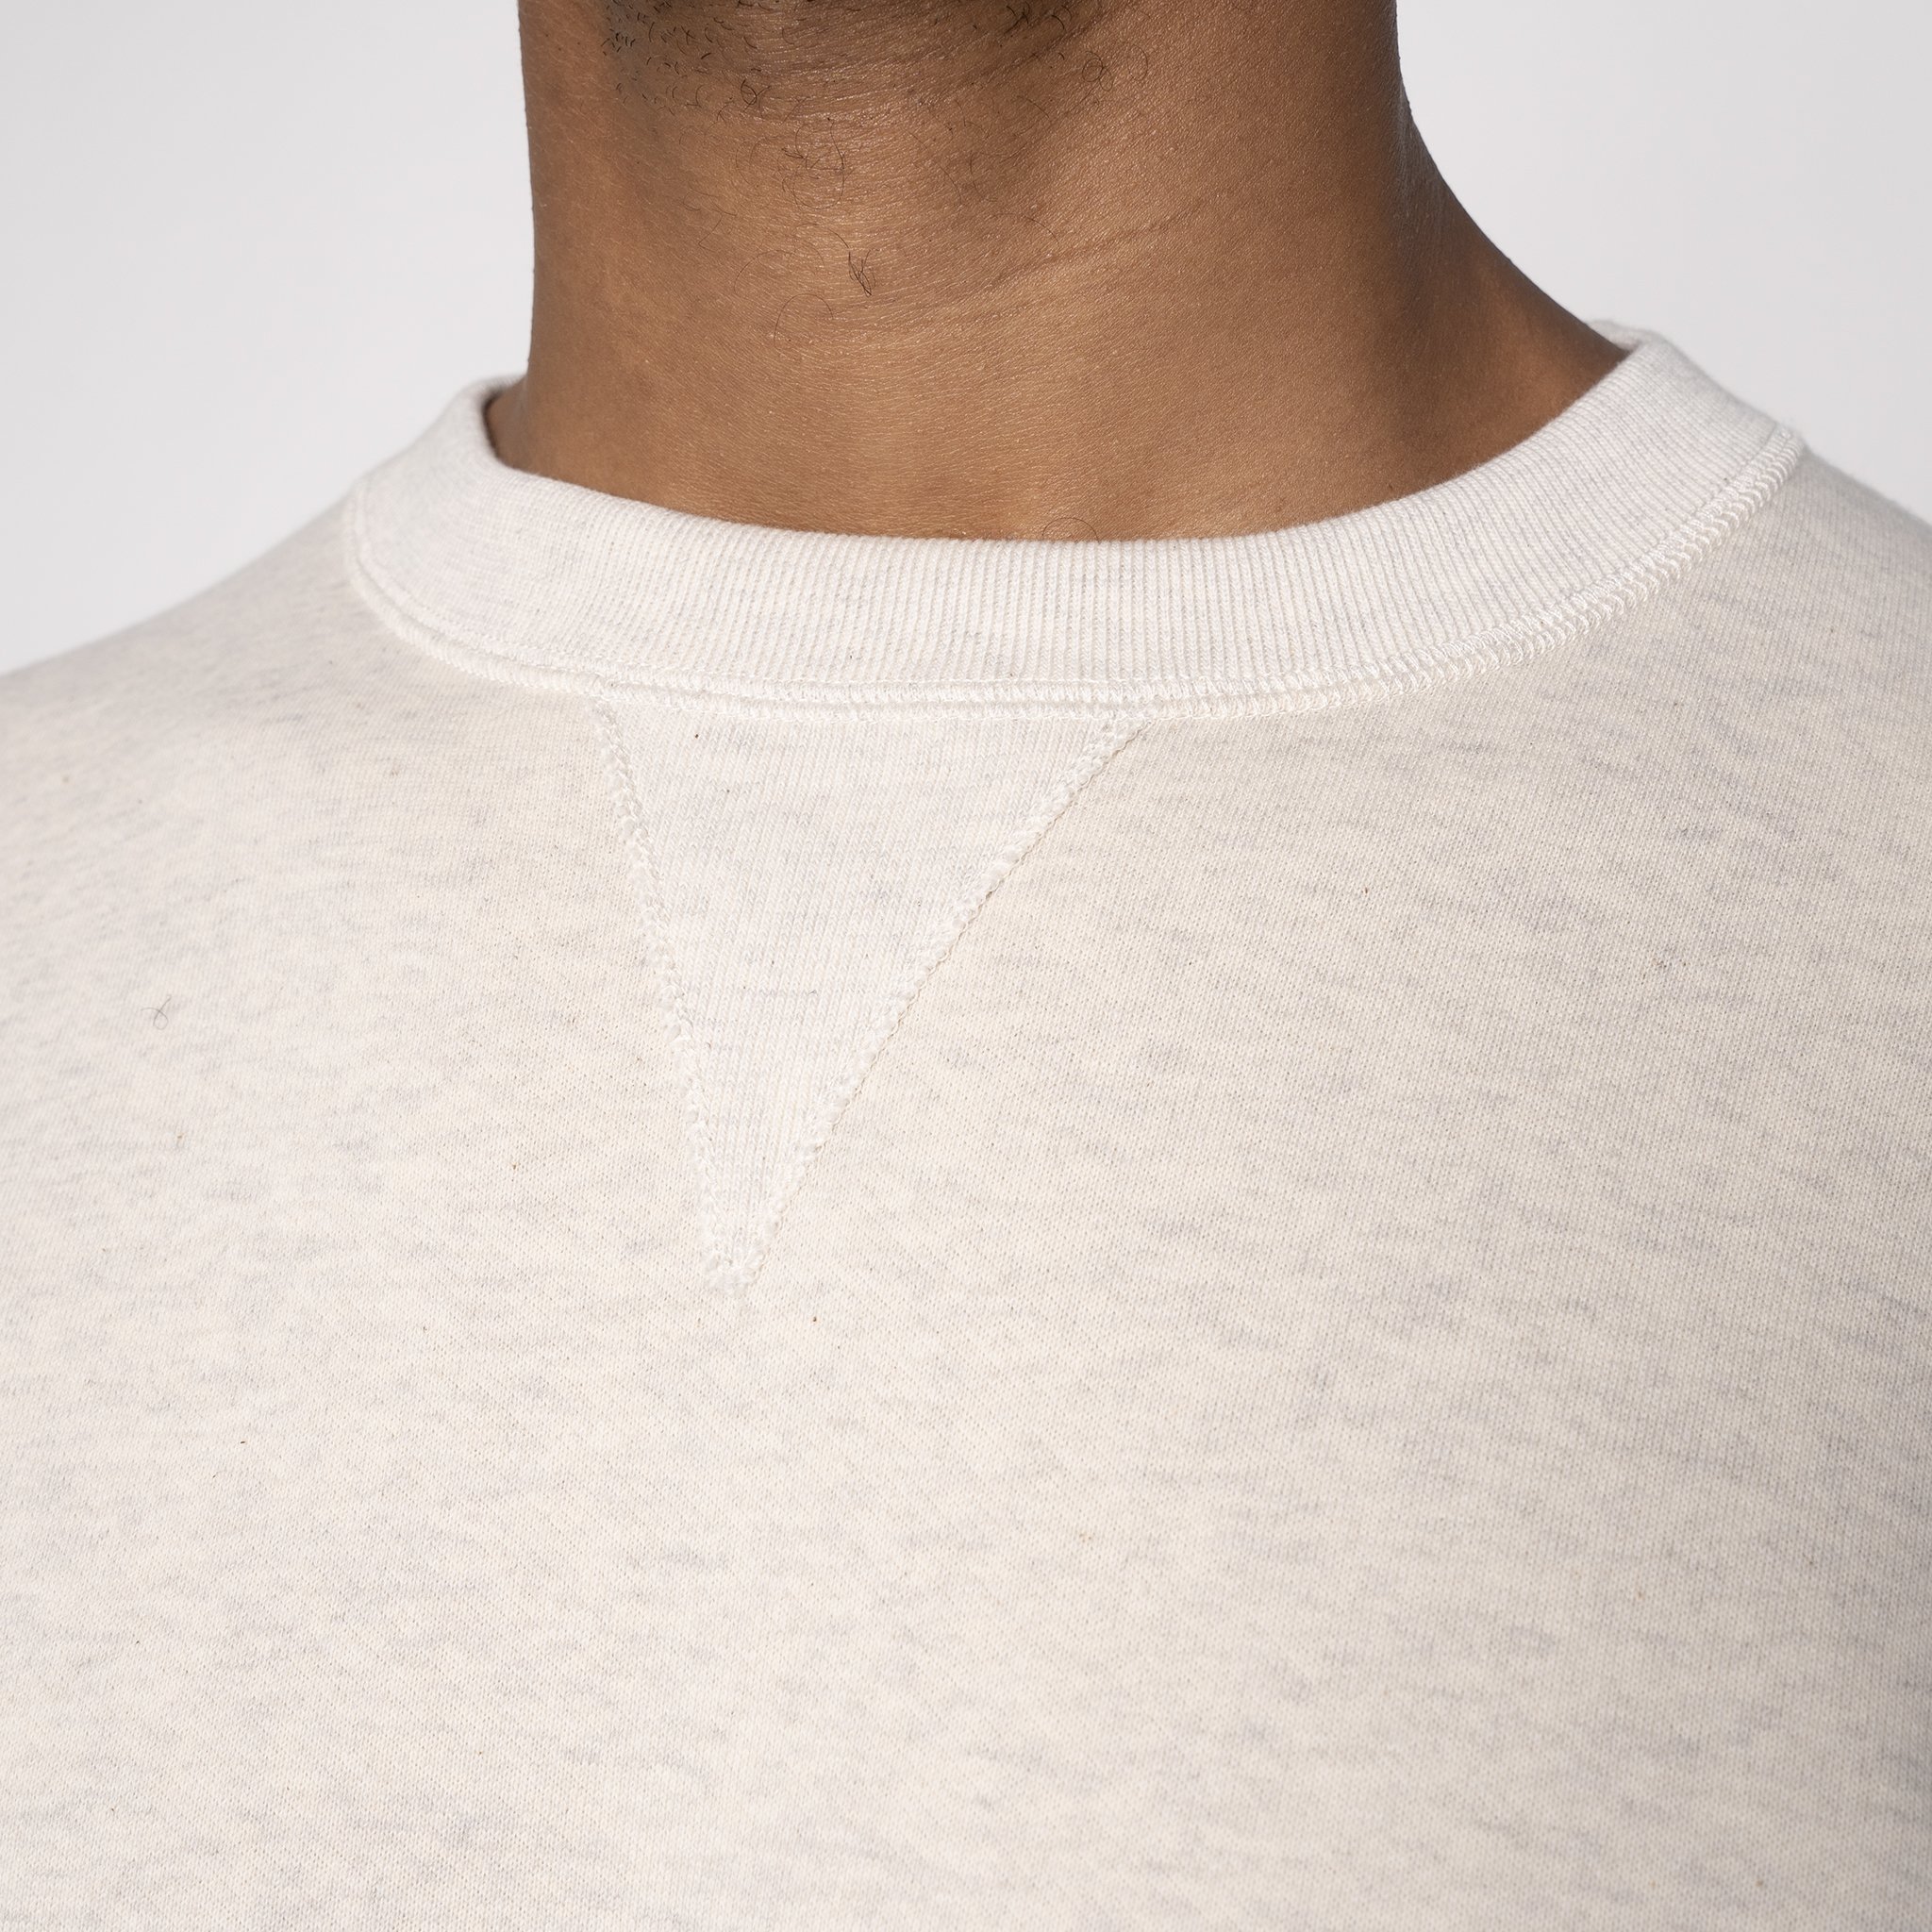  Crewneck - French Terry - Oatmeal 